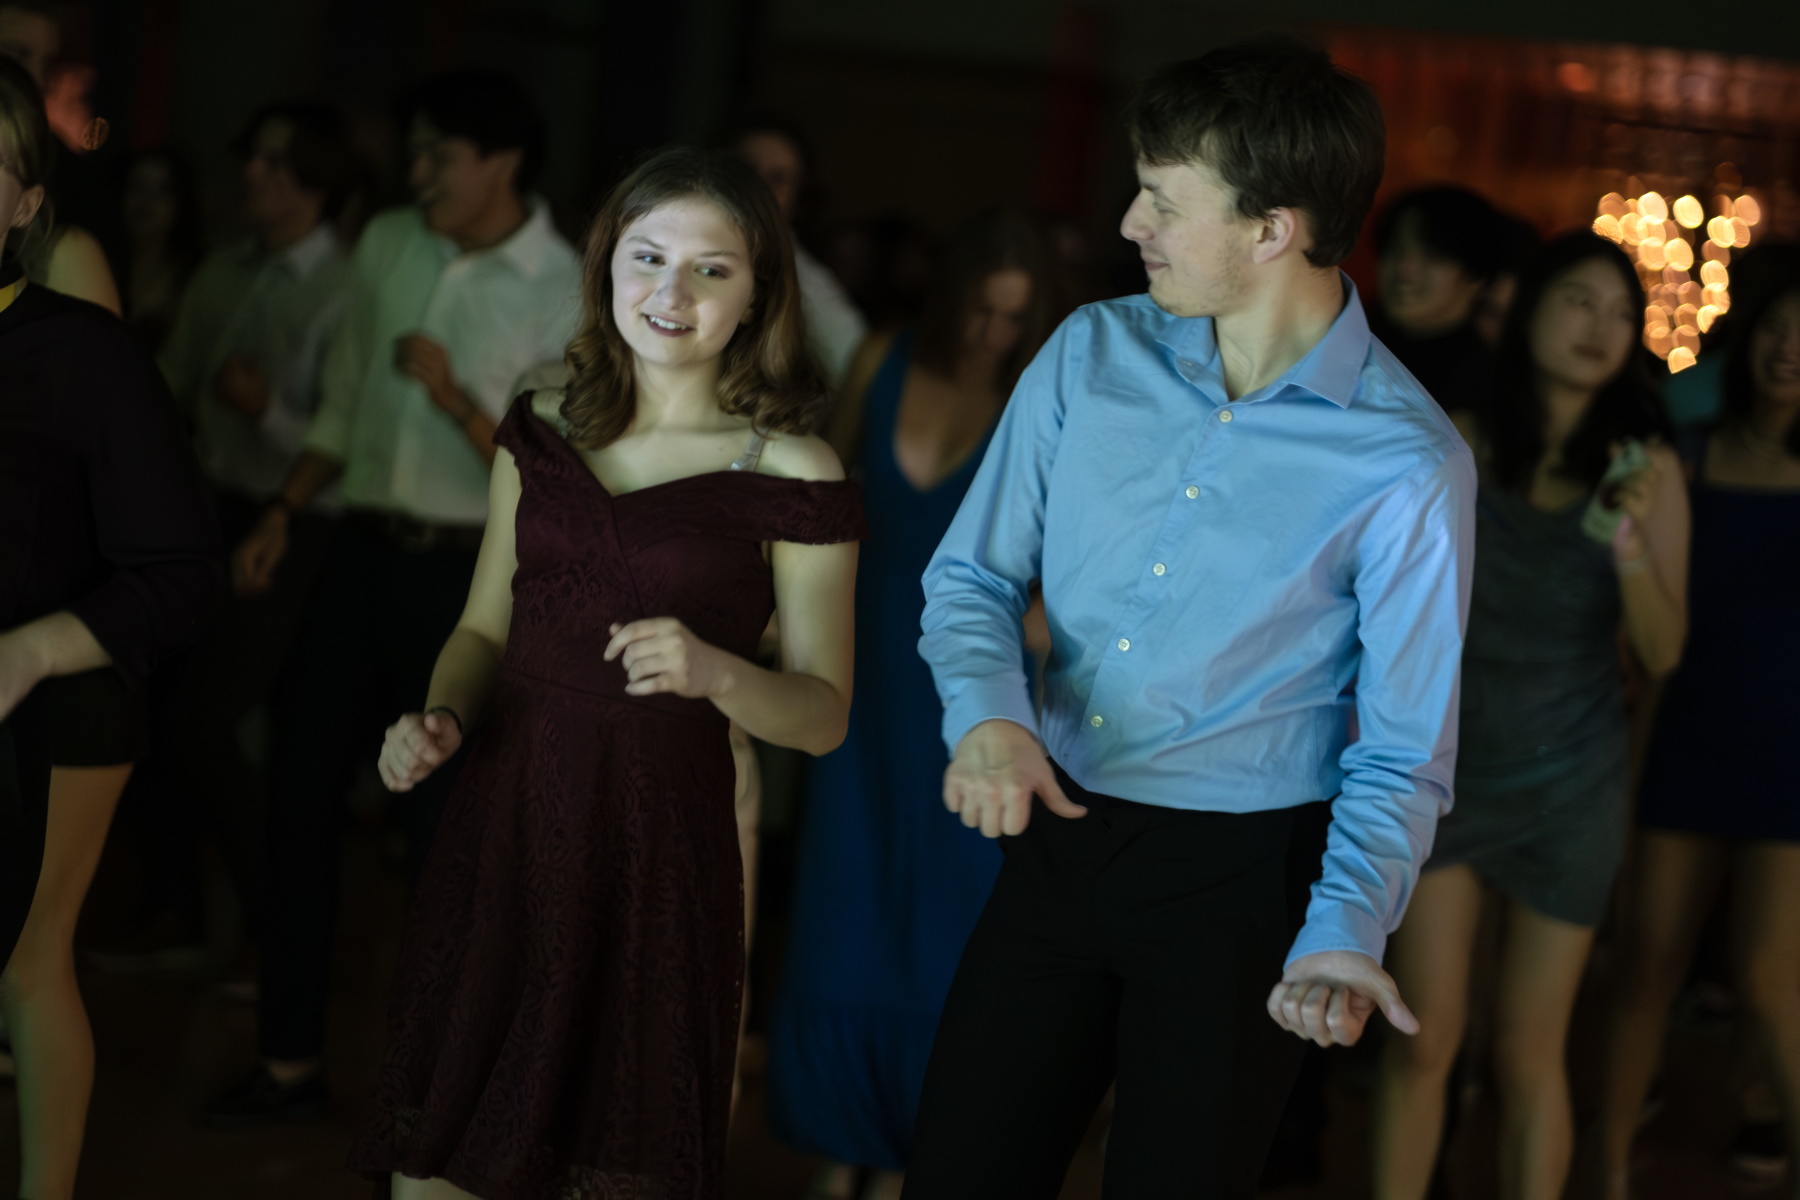 Students dance at the Homecoming dance.